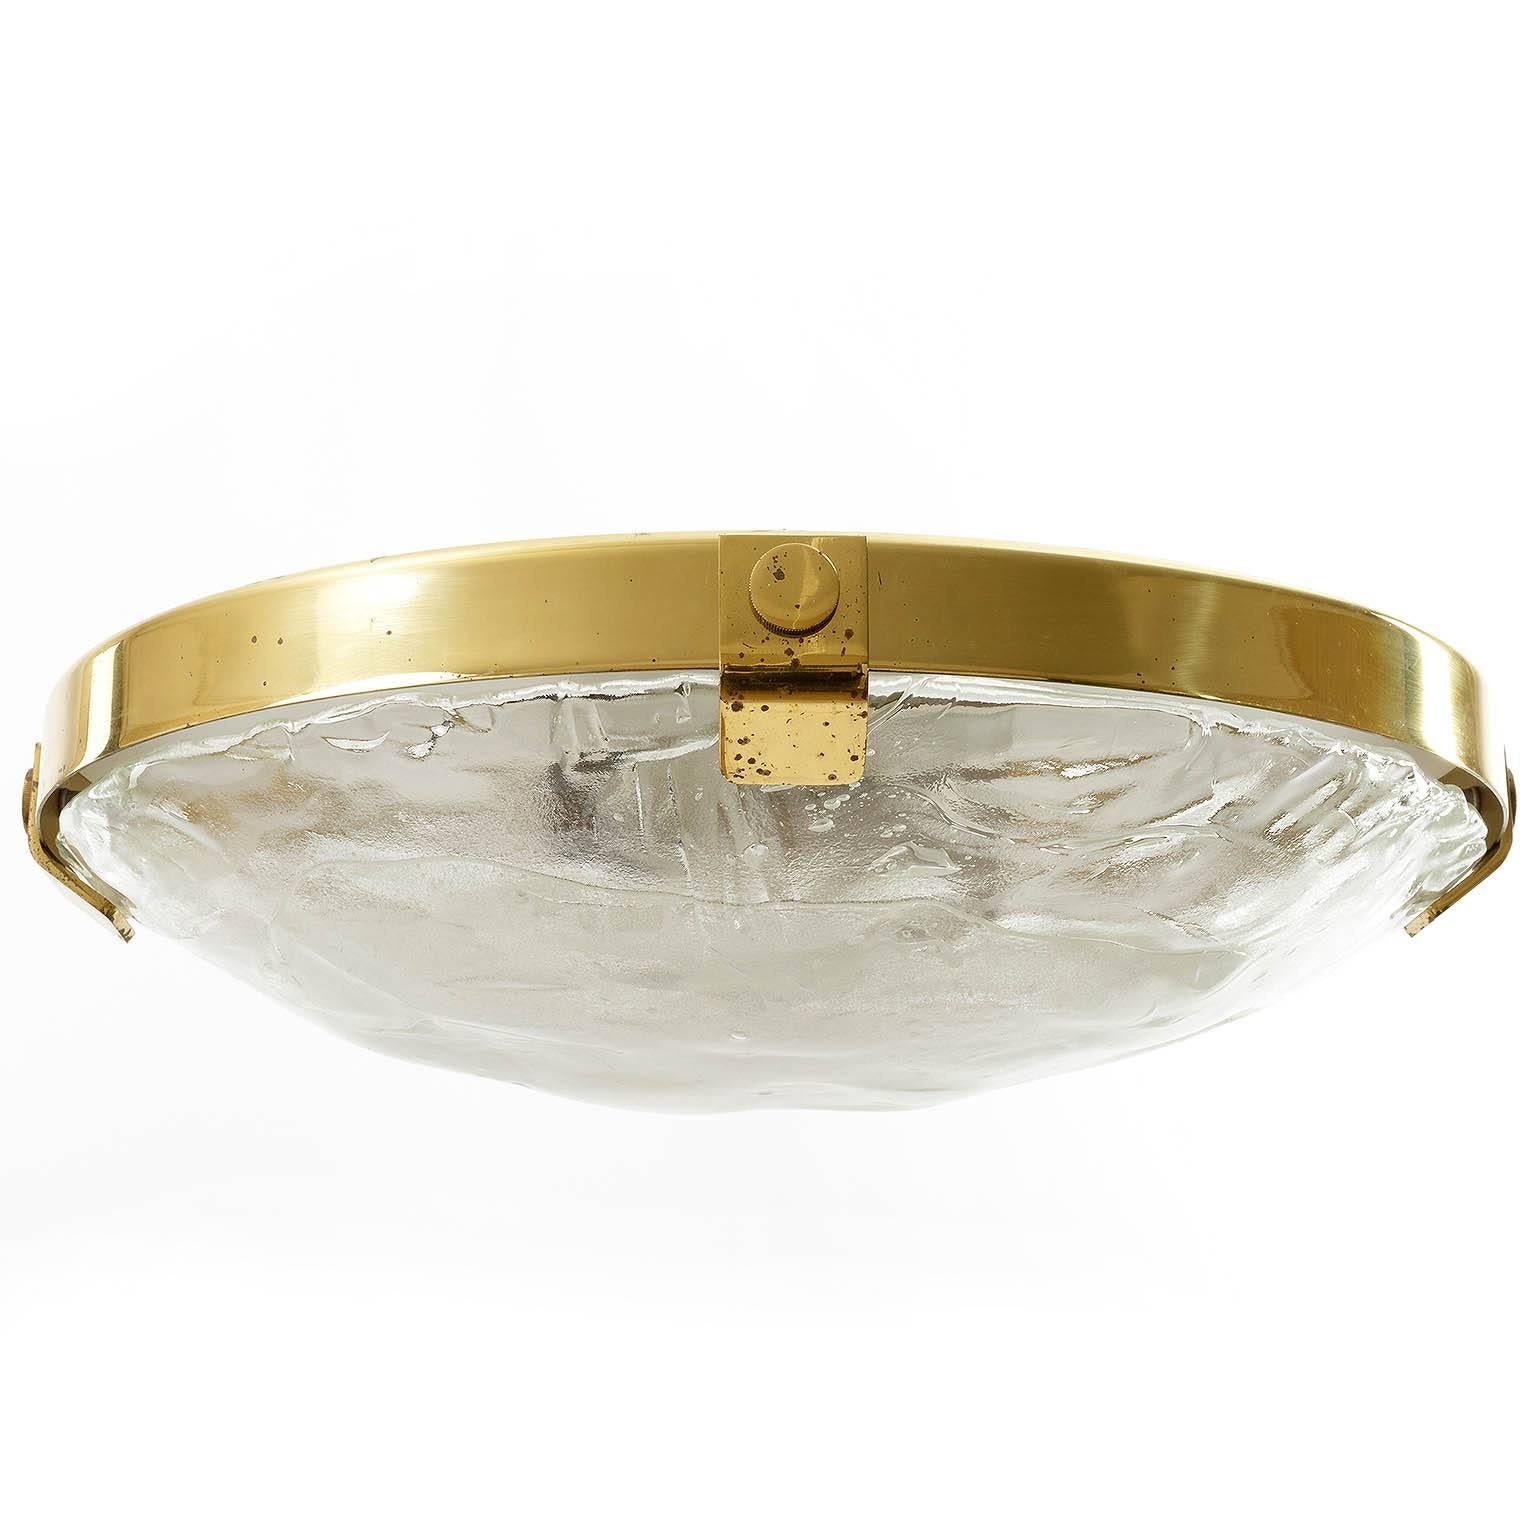 A pair brass and Murano glass flush mount light fixtures by Kalmar, manufactured in midcentury, circa 1970 (late 1960s or early 1970s).
Each fixture is made of a brass ring which holds a large hand blown glass with four brass brackets. The glass